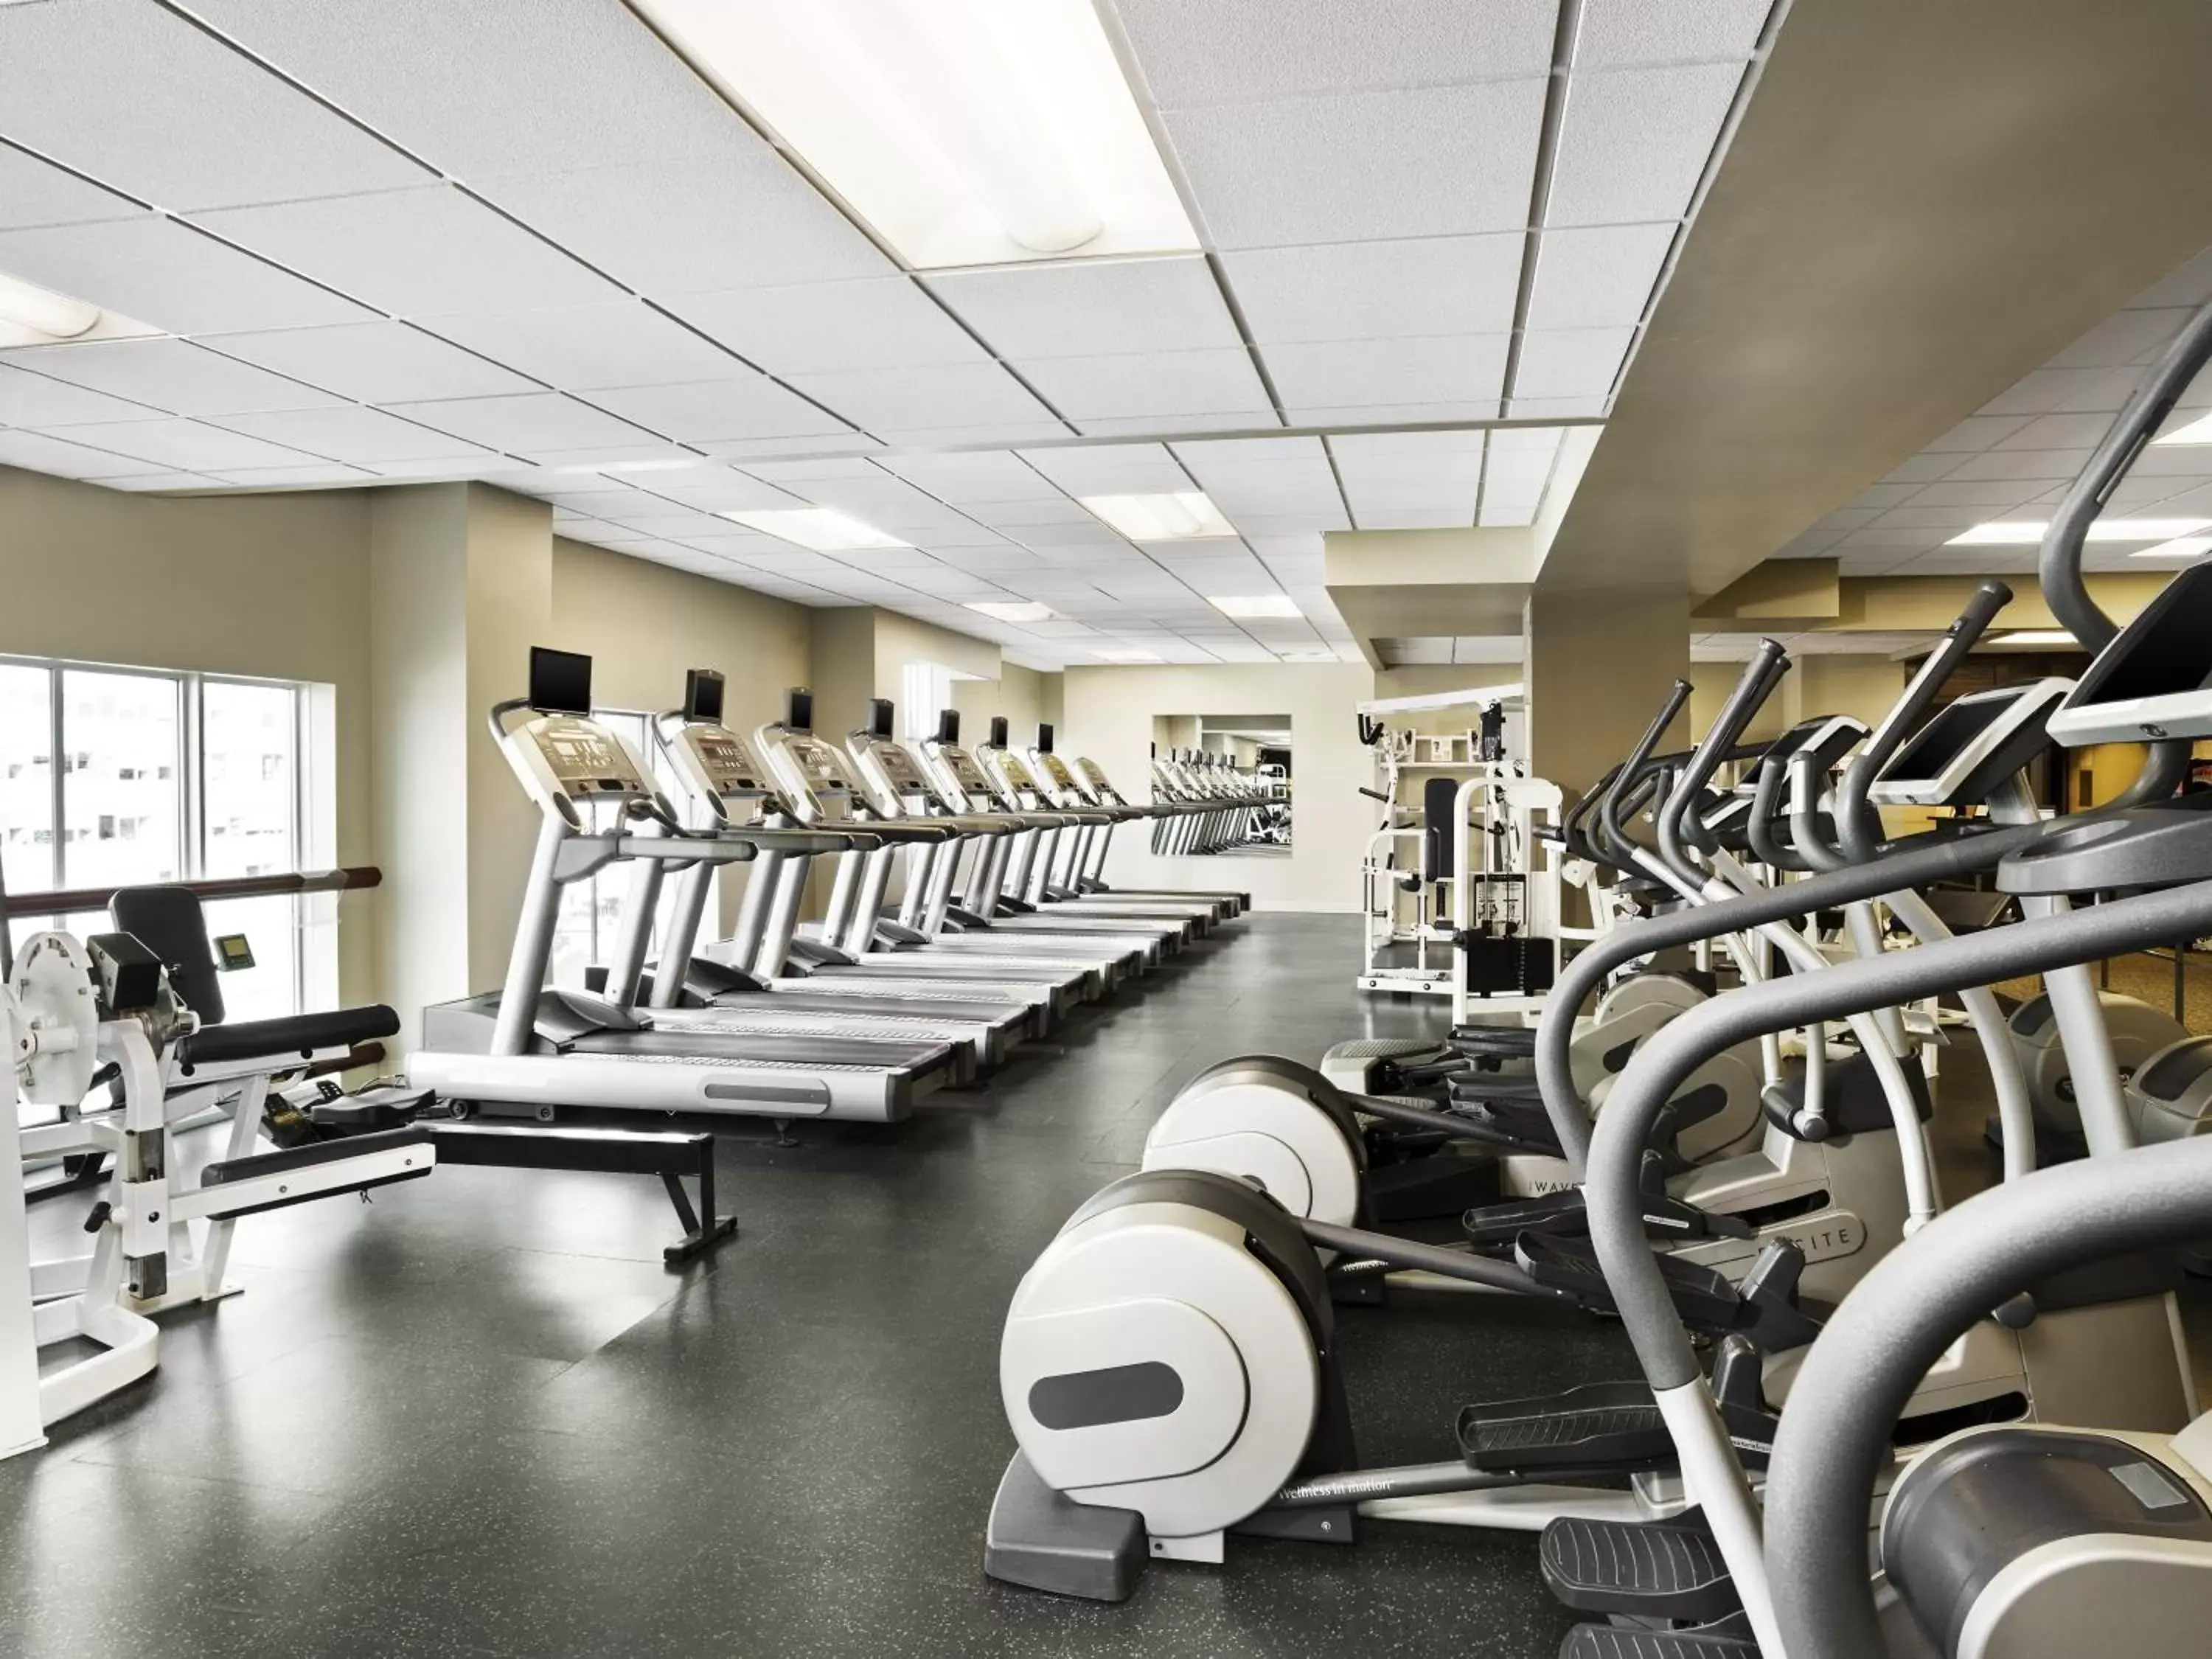 Fitness centre/facilities, Fitness Center/Facilities in Omni Providence